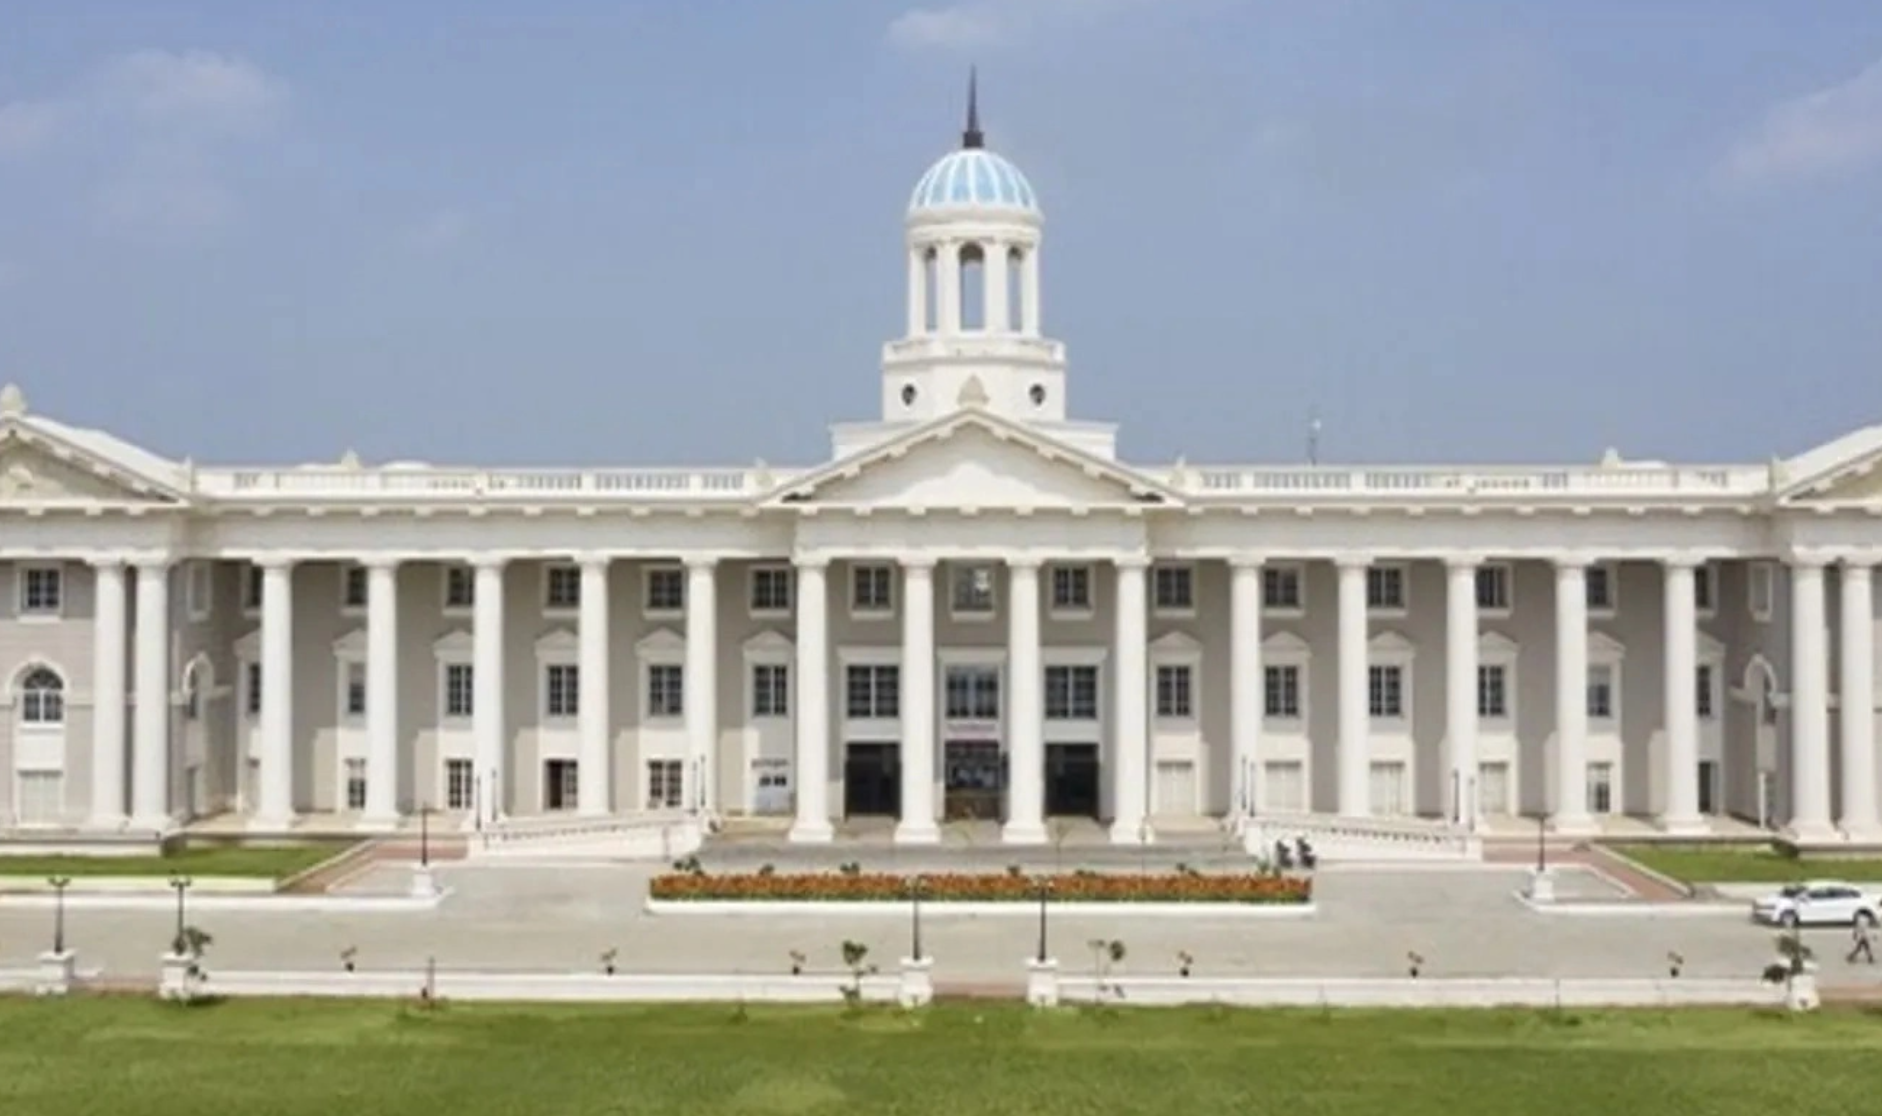 Top BBA LLB Colleges in India